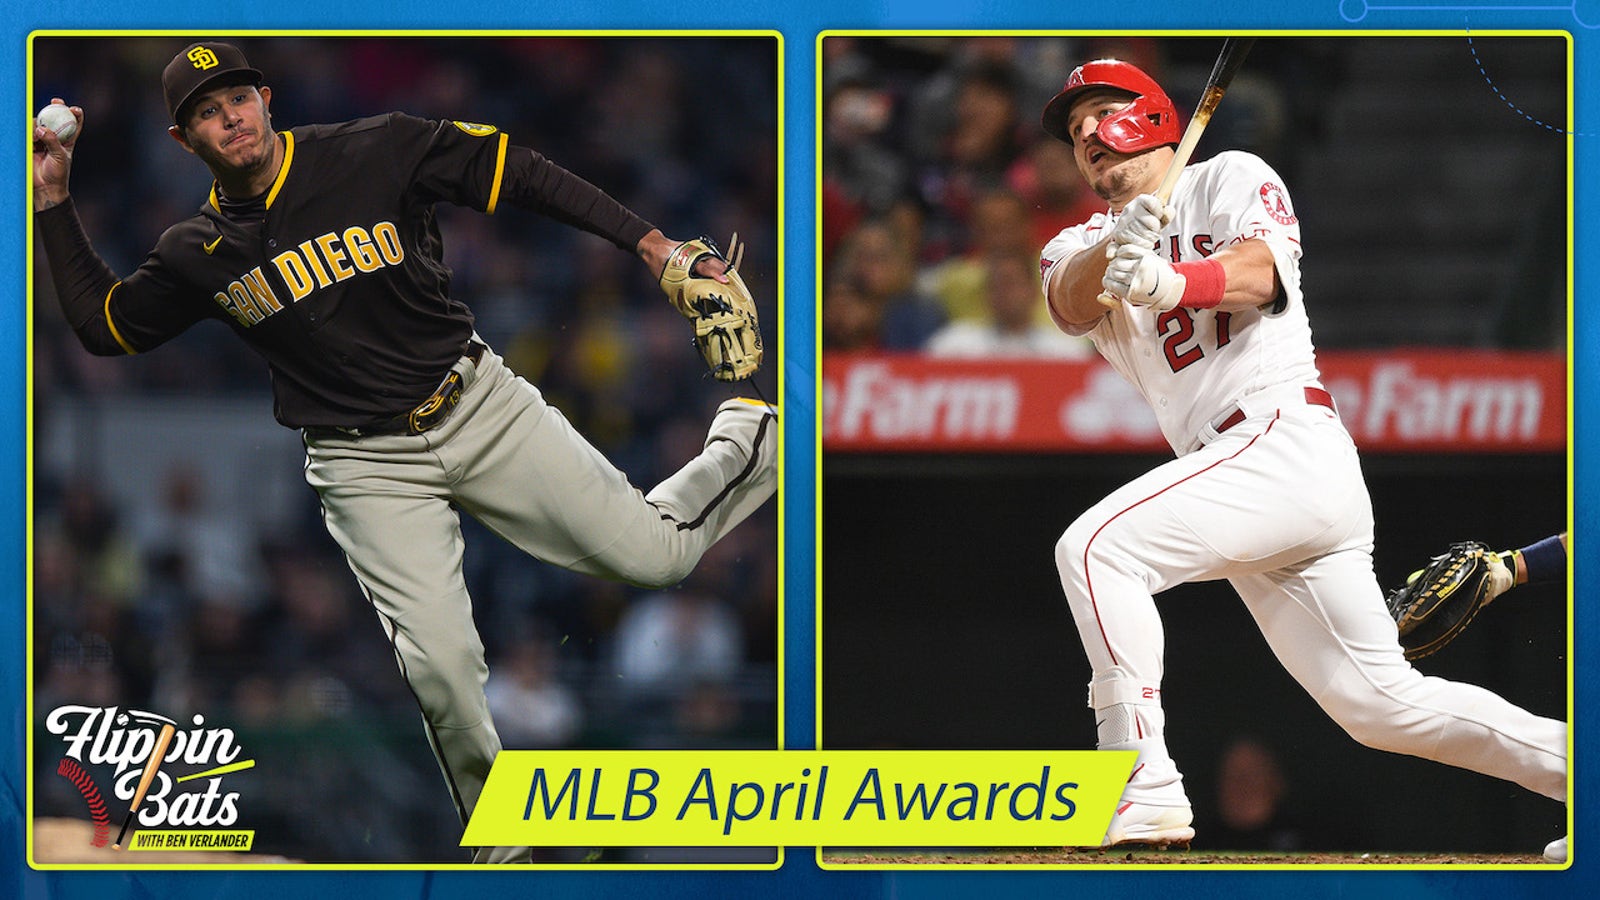 Mike Trout and Manny Machado headline way-too-early MLB awards